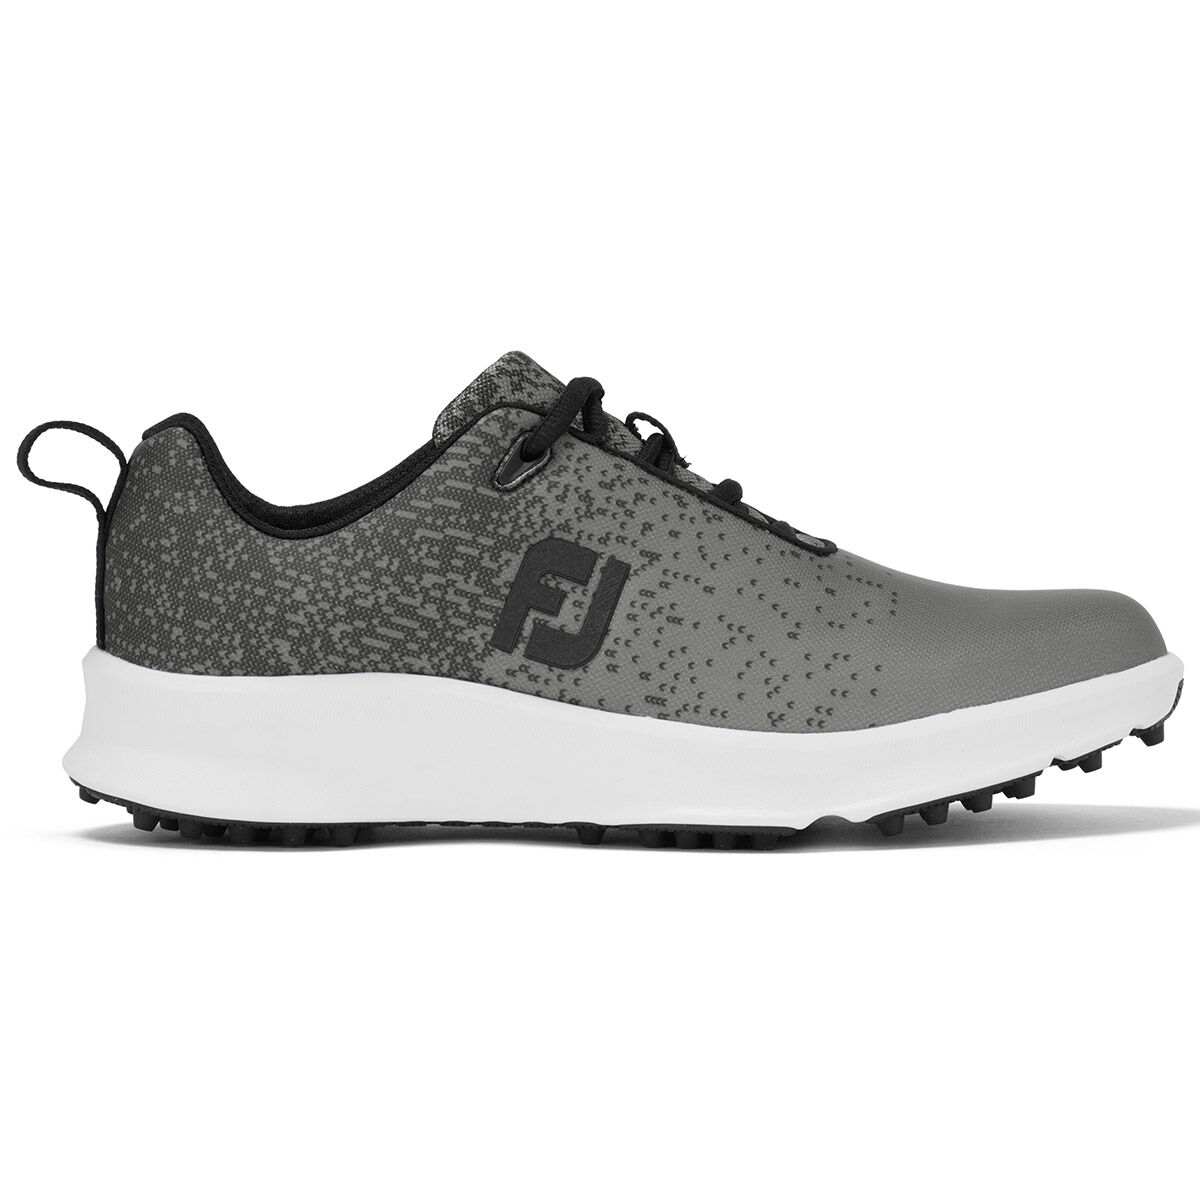 FootJoy Leisure Ladies Shoes from 